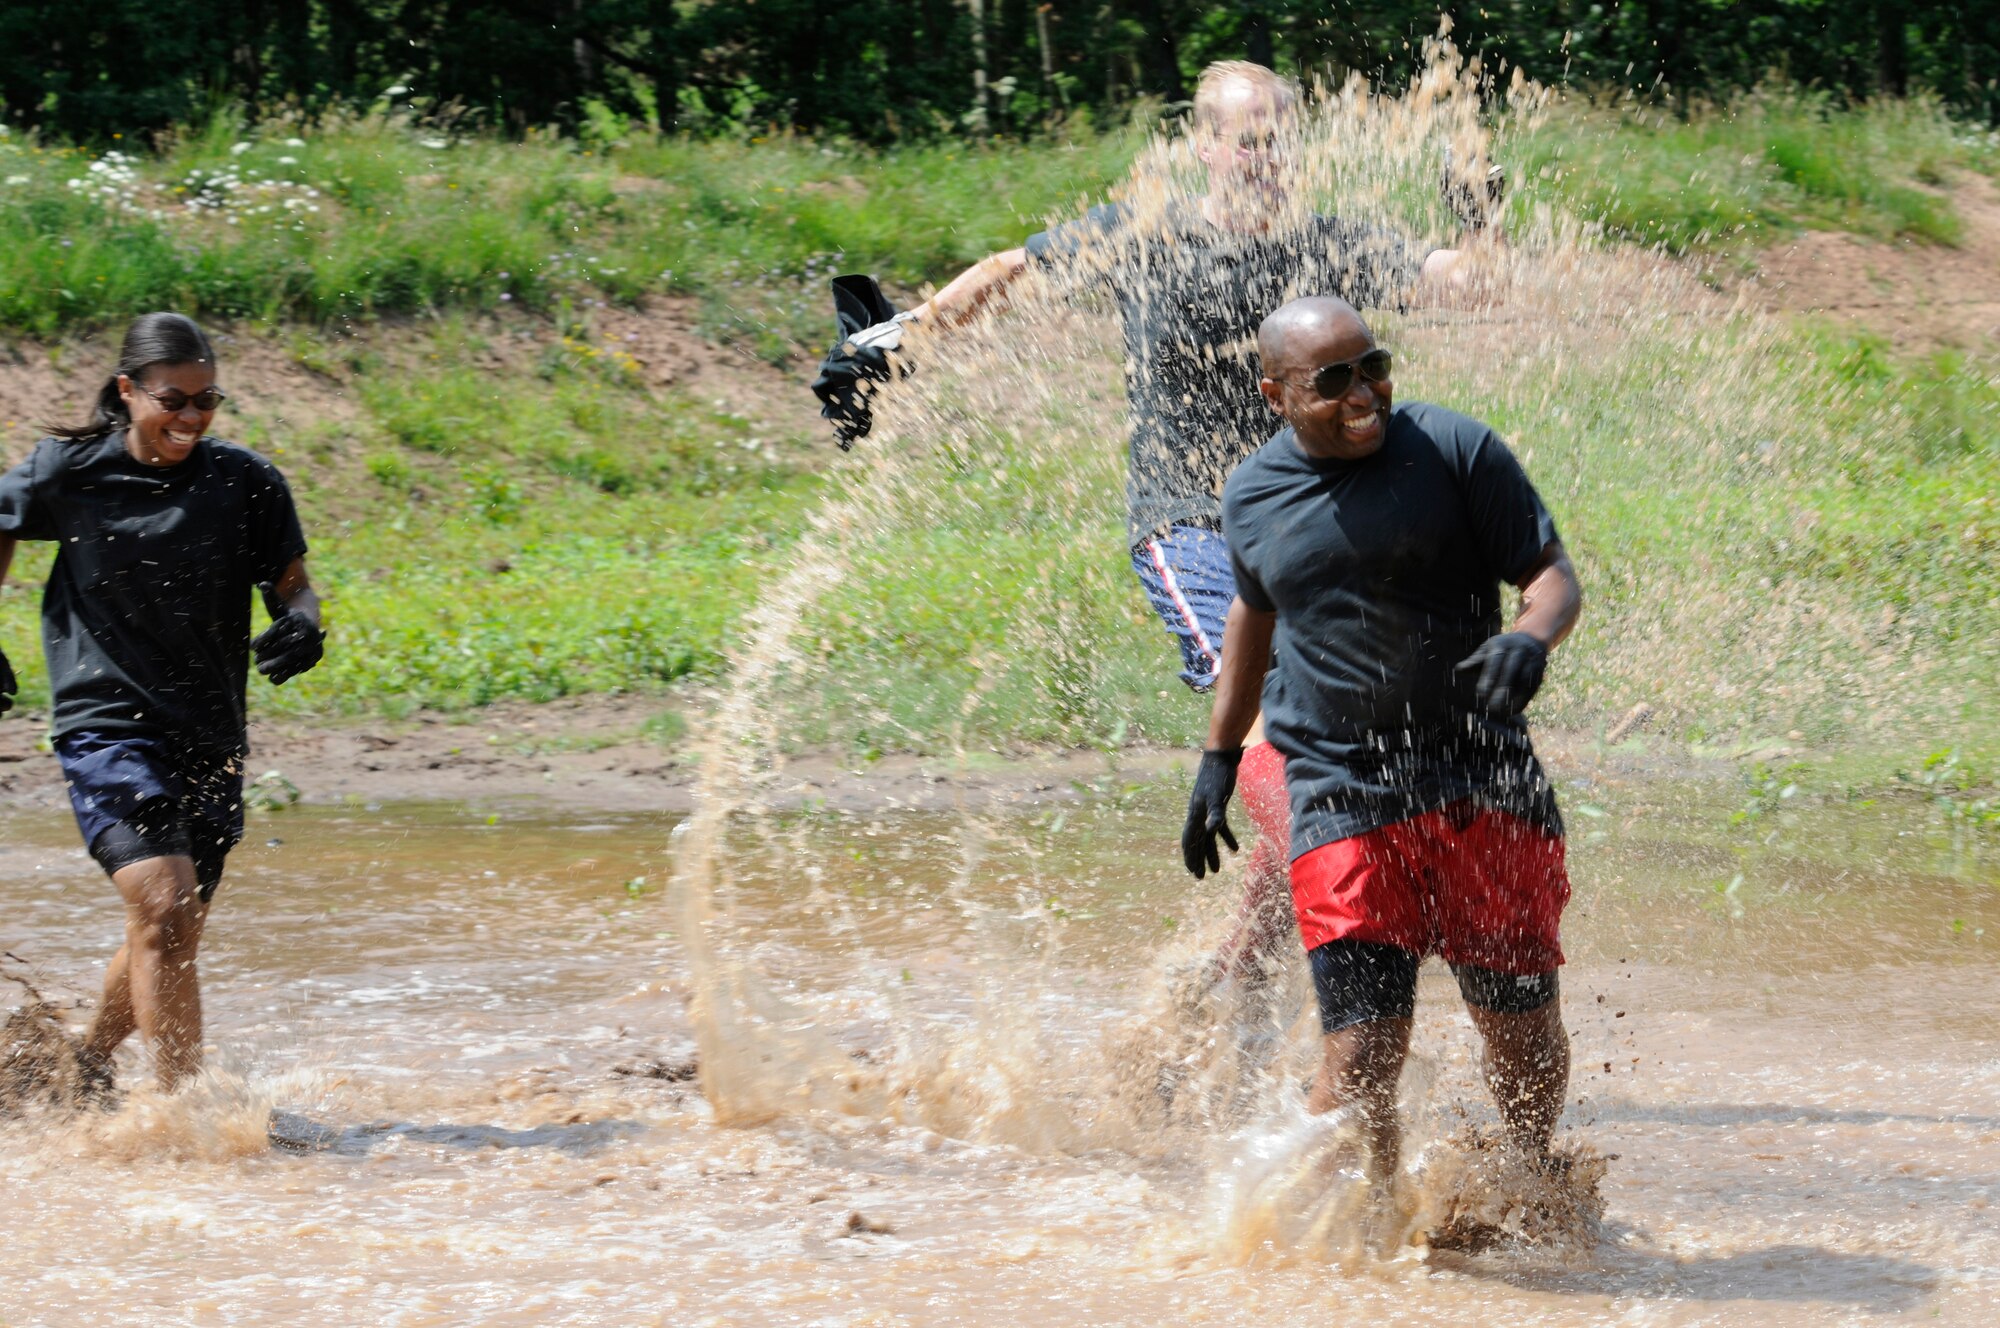 SPANGDAHLEM AIR BASE, Germany – William Byrd, 52nd Medical Group, runs through a pond with his team, Bogaard & Friends, during the Saber Endurance Challenge here June 3. Teams of five were judged on team creativity, guessing their time and money raised. Students from Bitburg High School guessed their time closest within four minutes of estimated completion. Team Soup Kitchen from the 52nd Equipment Maintenance Squadron was awarded most creative, and Team MDSS from the 52nd Medical Group raised the most money. The challenge was hosted by the Tier II council and raised money for the Wounded Warrior Project at Landstuhl Regional Medical Center, Germany. (U.S. Air Force photo/Airman 1st Class Brittney Frees)